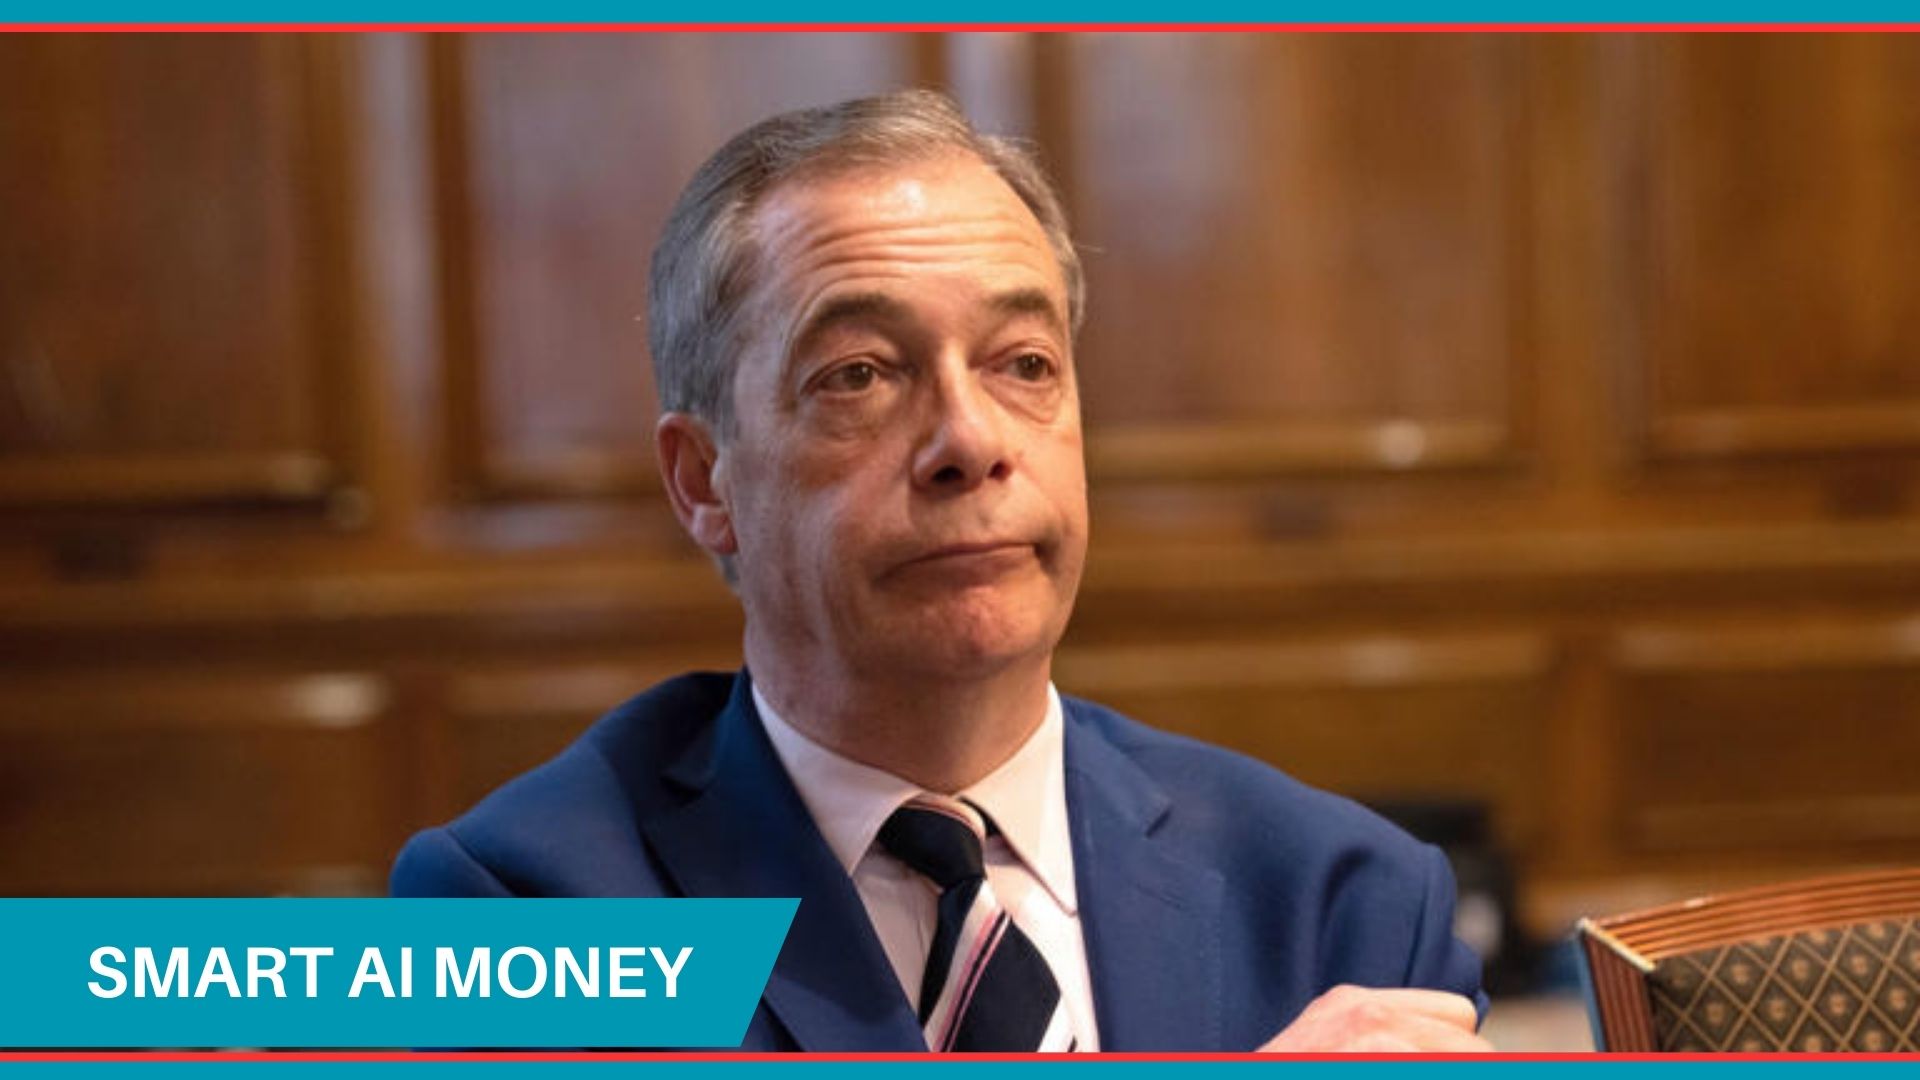 UK Banks to Be Summoned to Treasury Meet After Farage Uproar